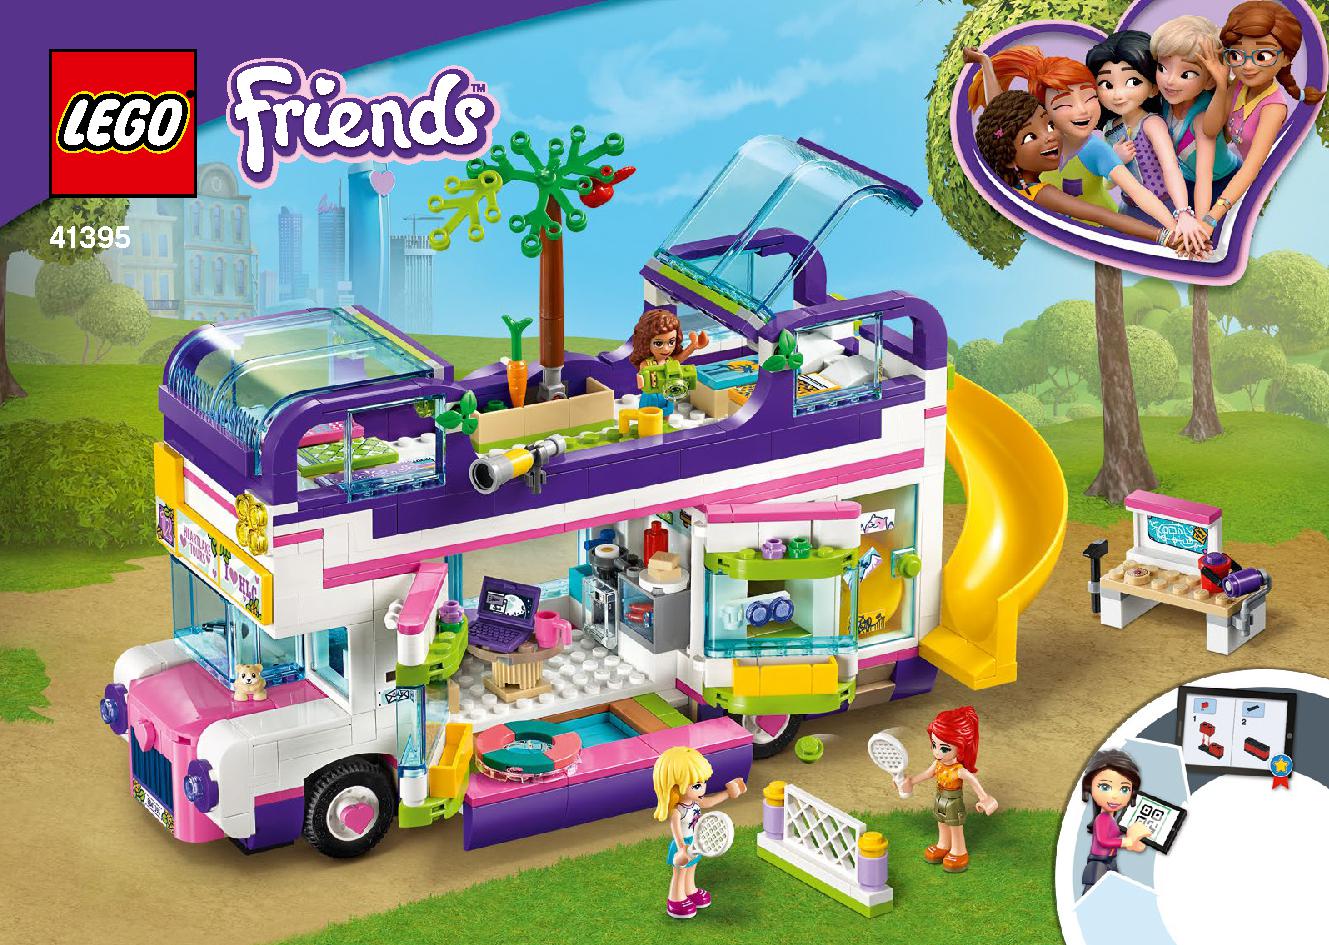 Friendship Bus 41395 LEGO information LEGO instructions 1 page